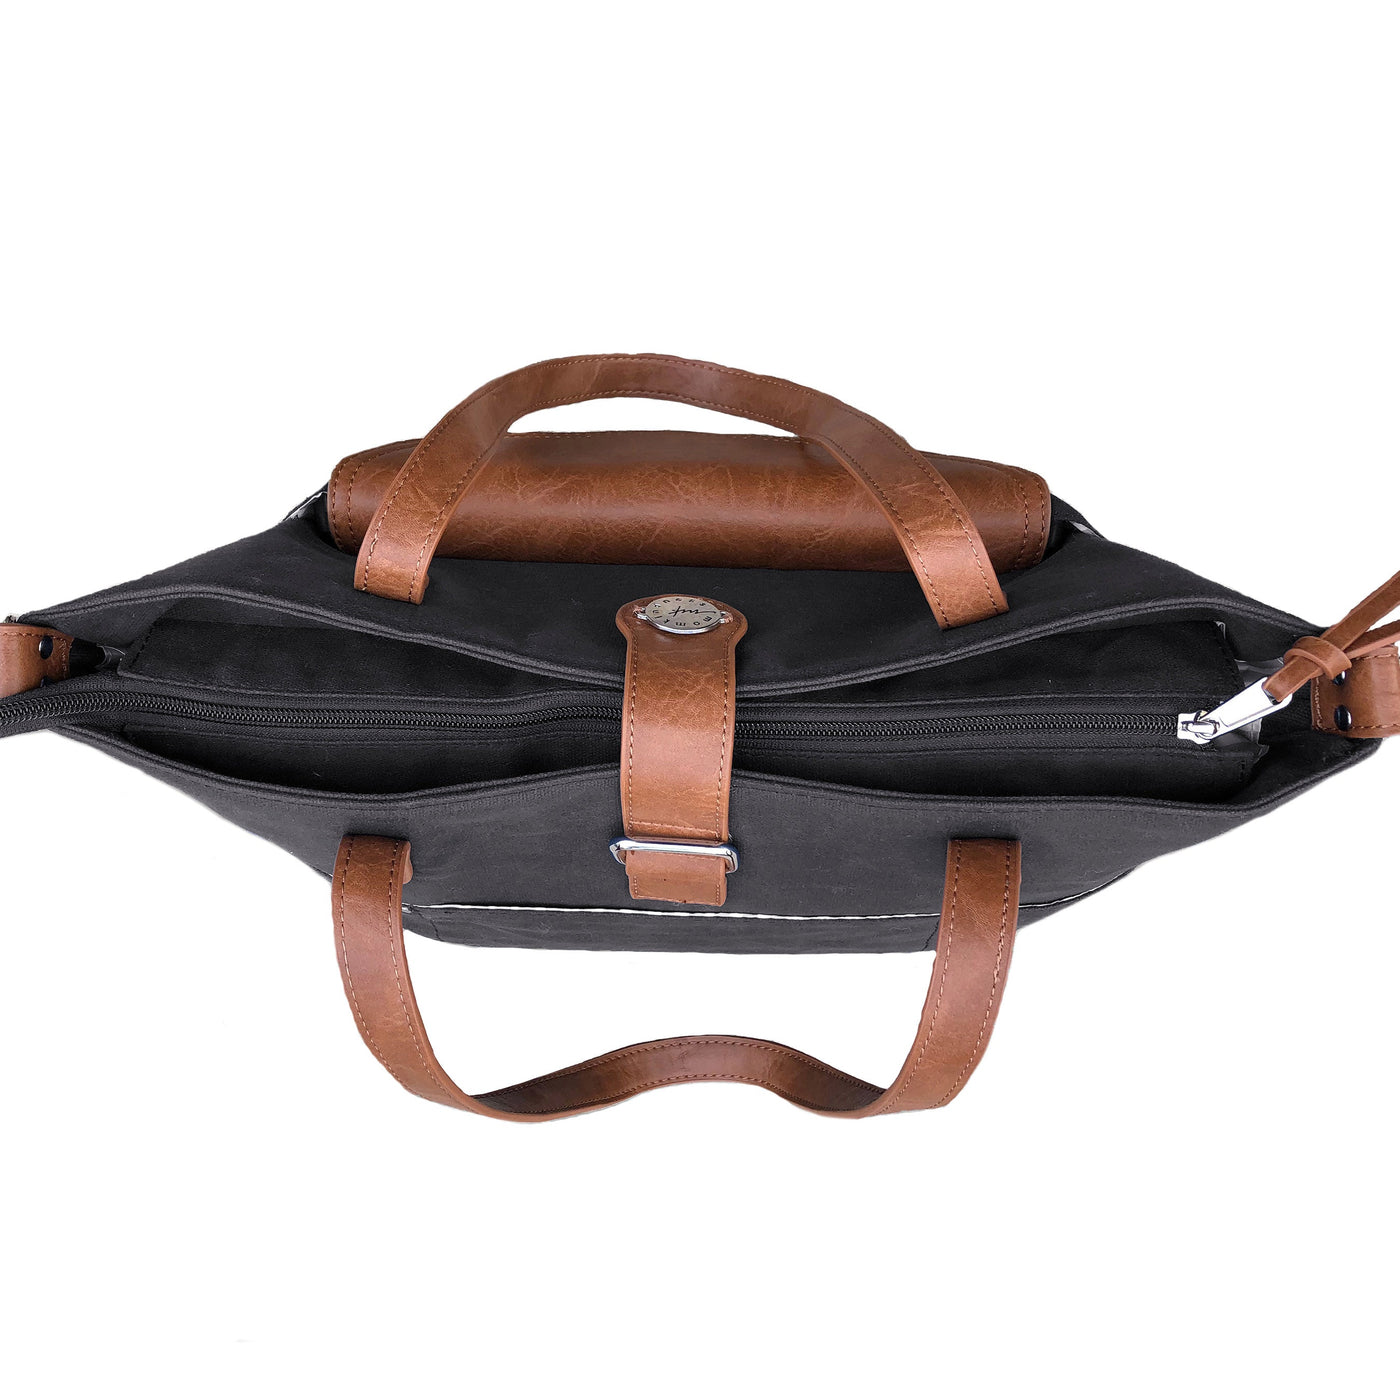 Top down view of black waxed canvas tote with brown vegan leather accents with closed zipper top.